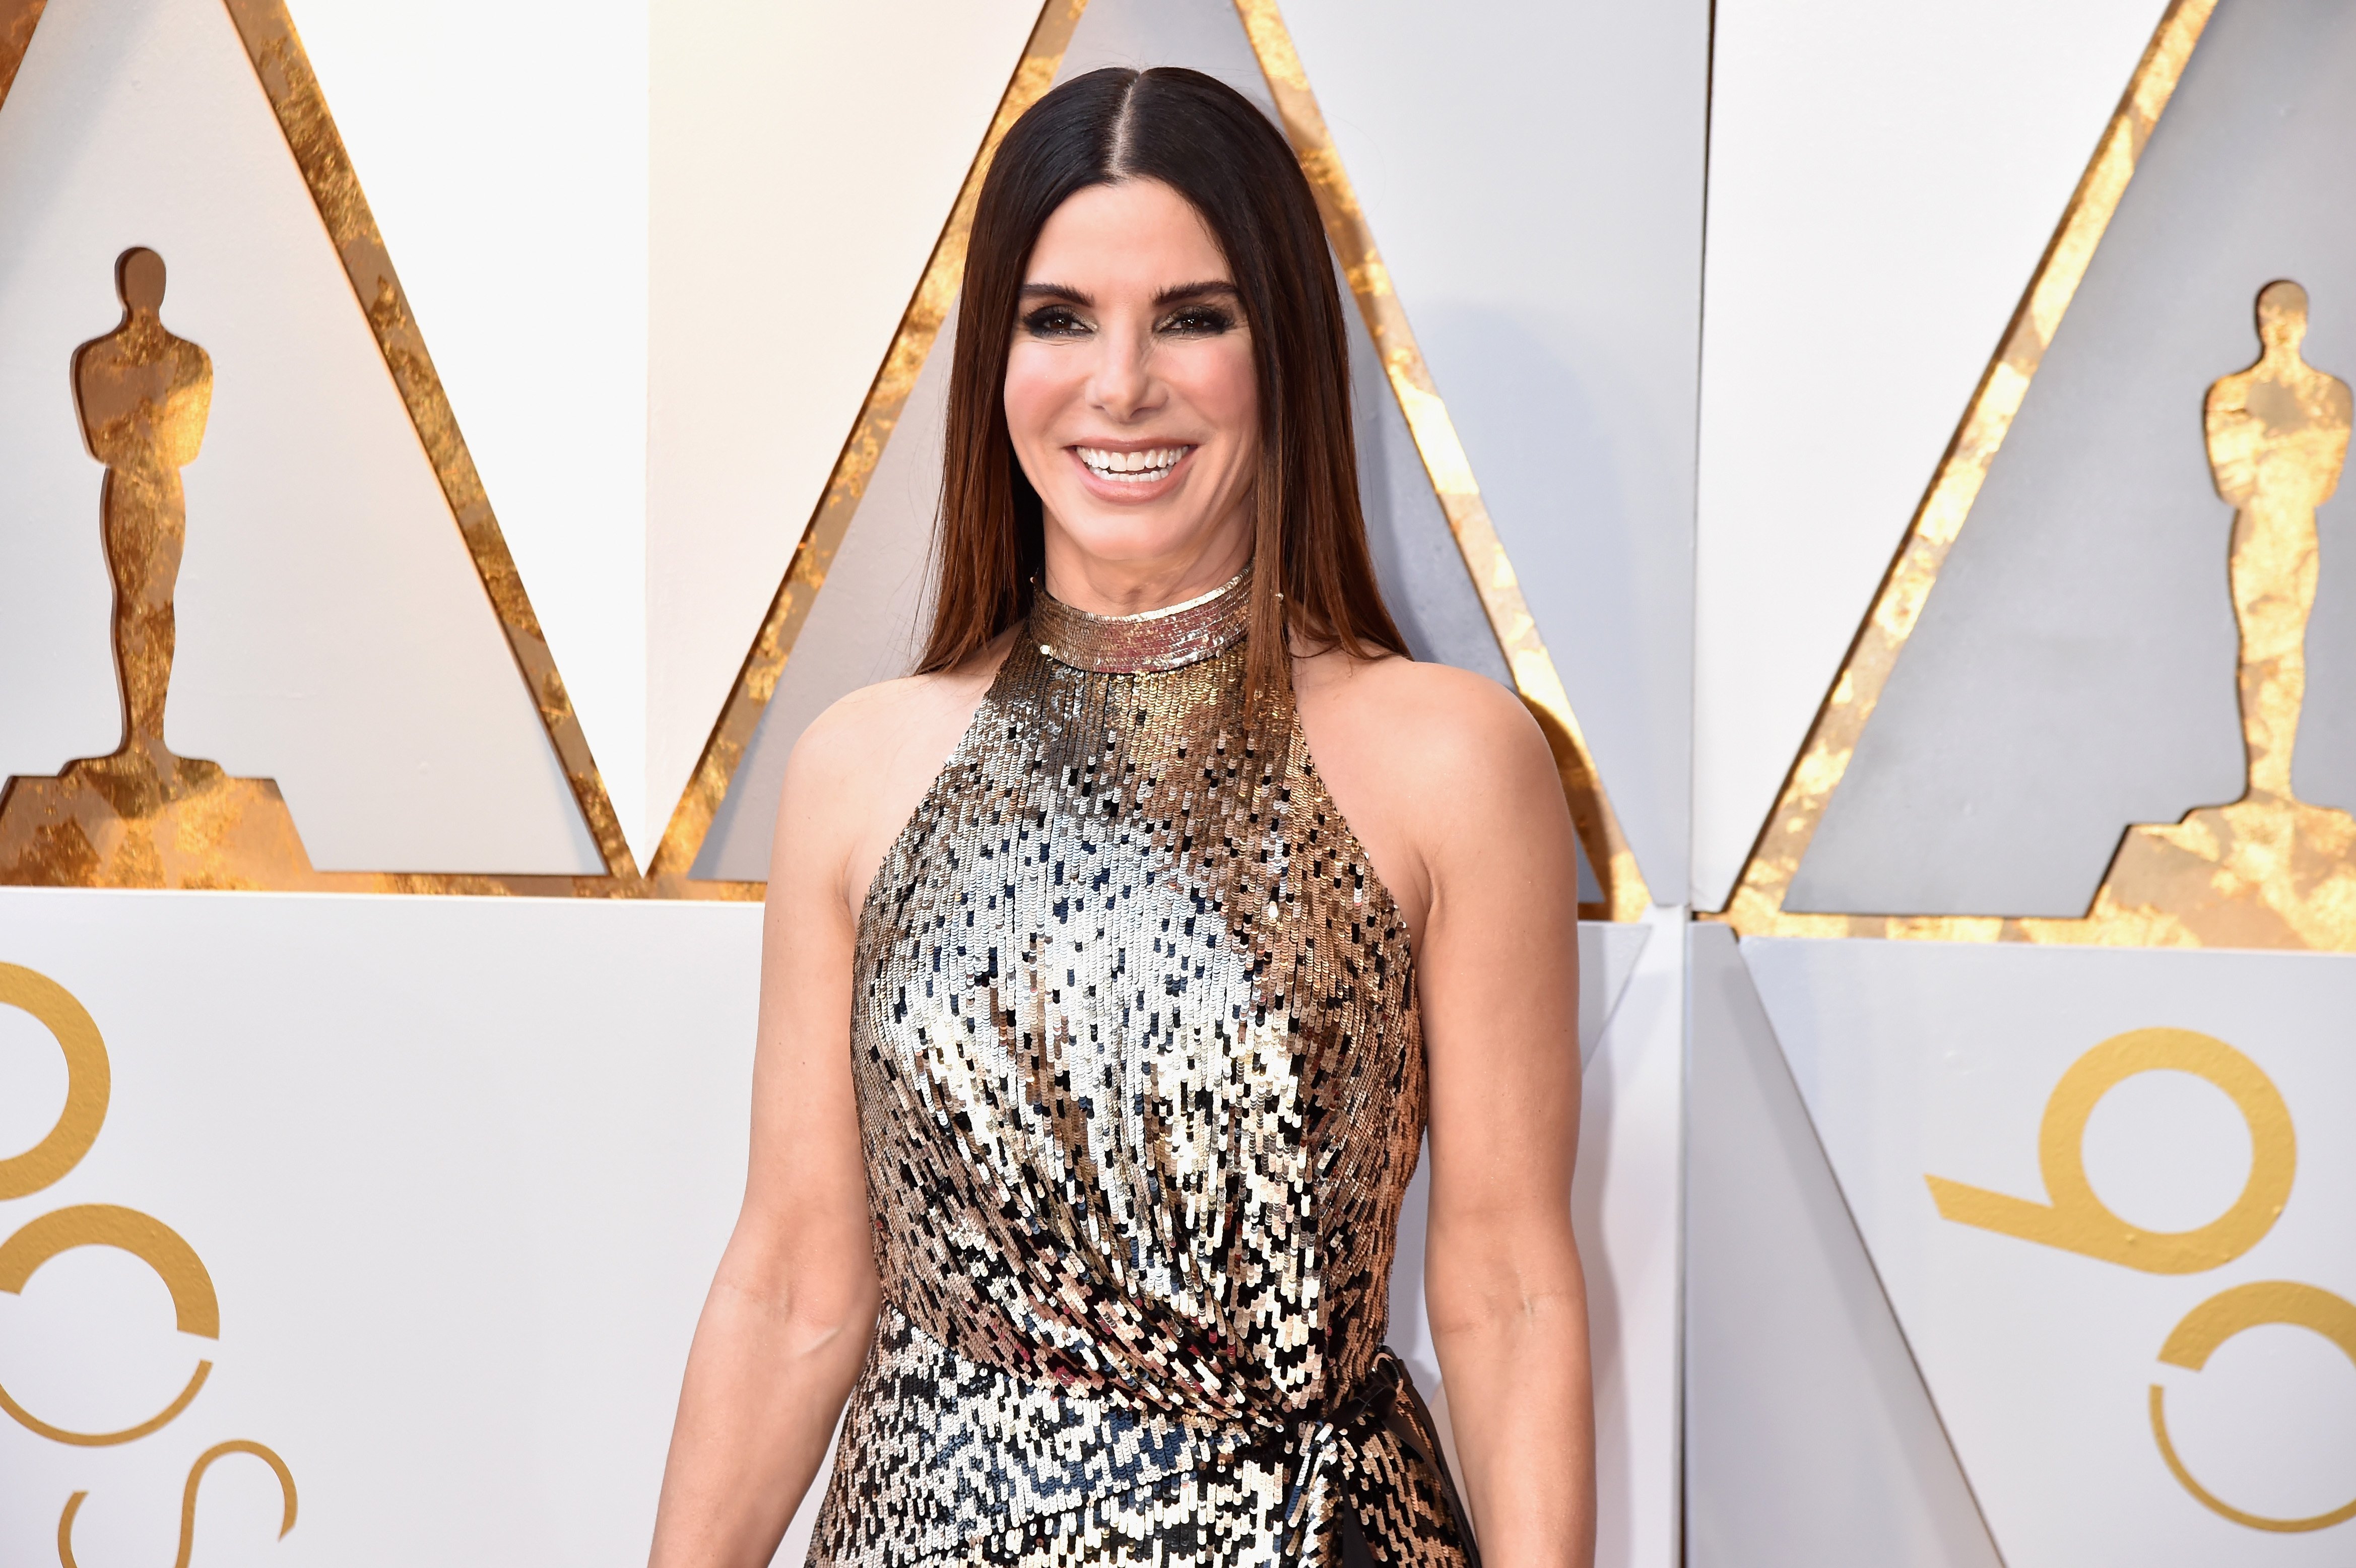 Sandra Bullock at the 90th Annual Academy Awards on March 4, 2018 | Source: Getty Images